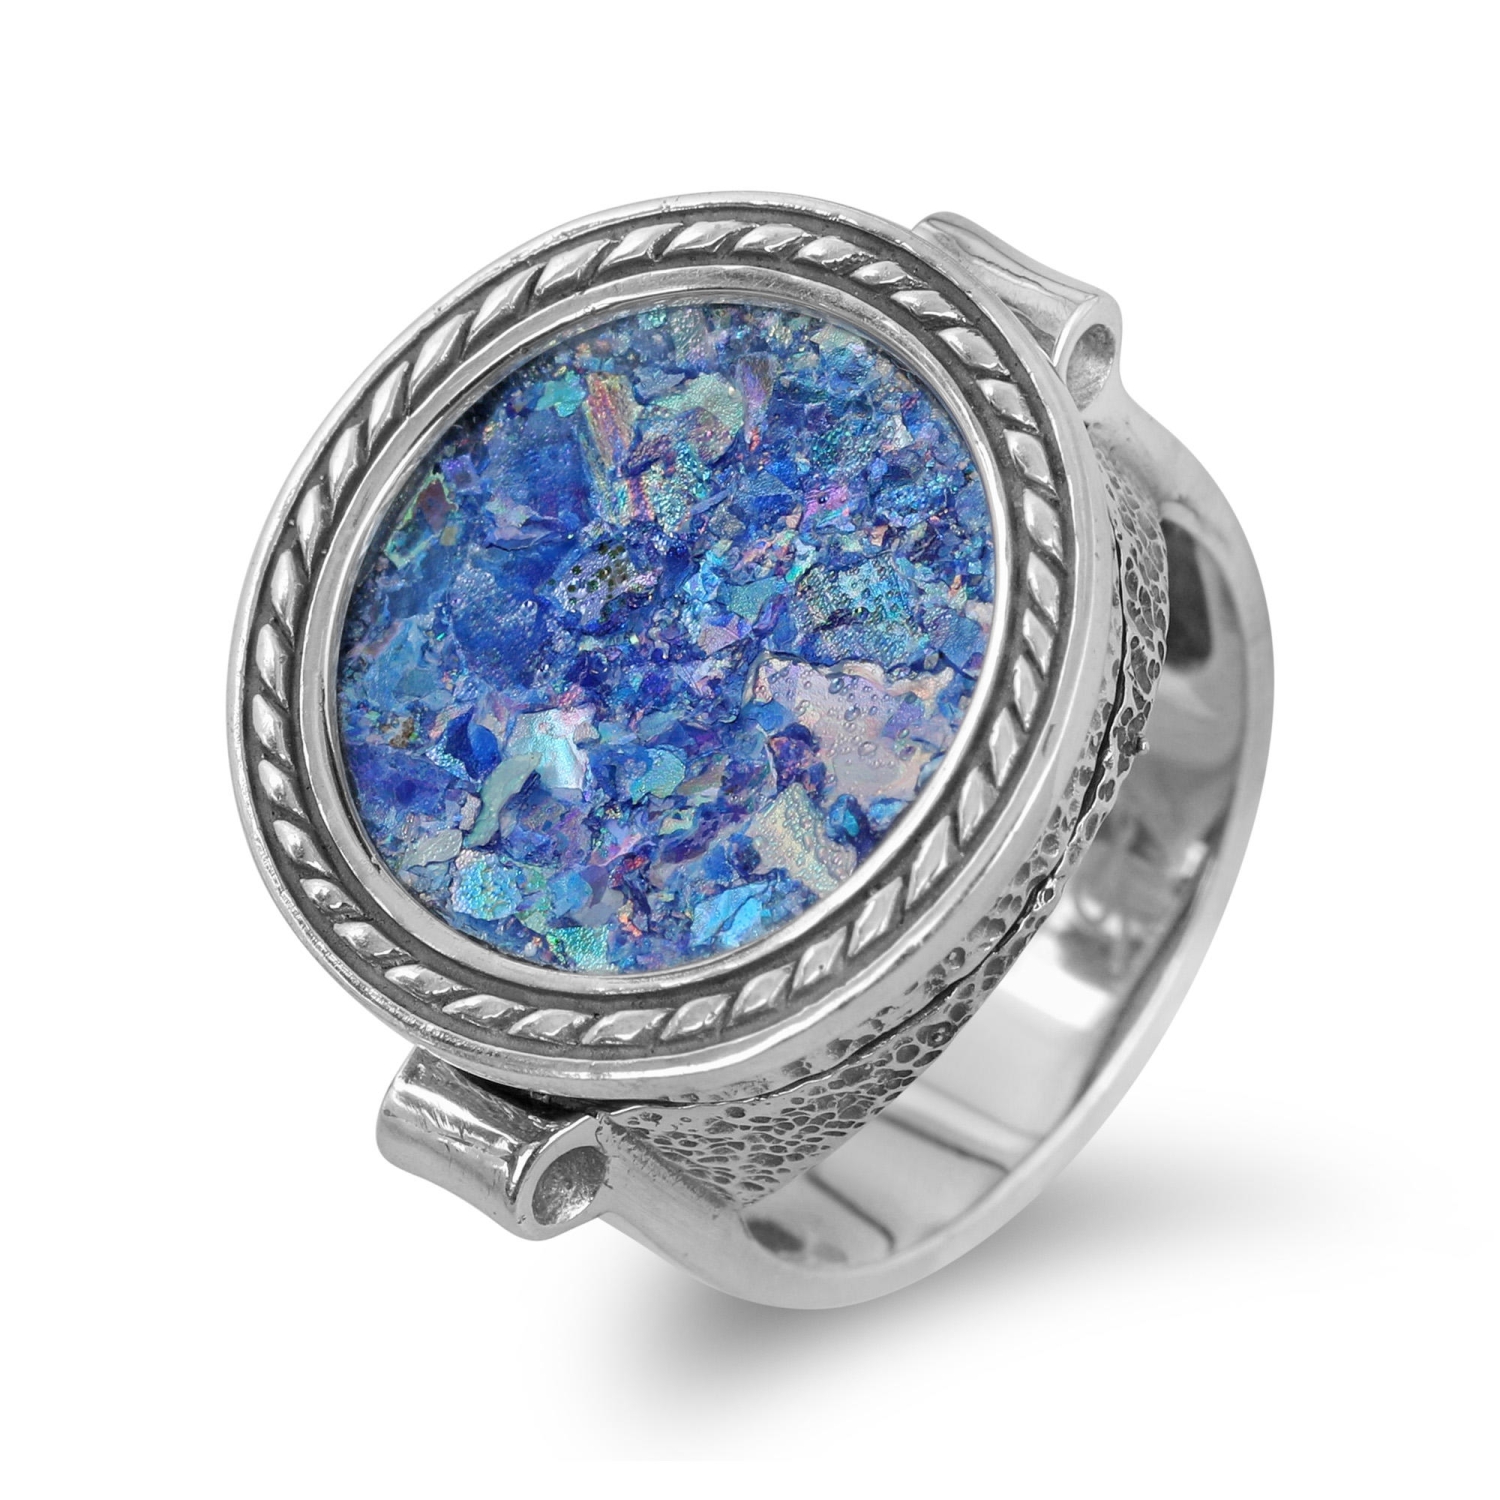 Sterling Silver and Roman Glass Round Ring - 1